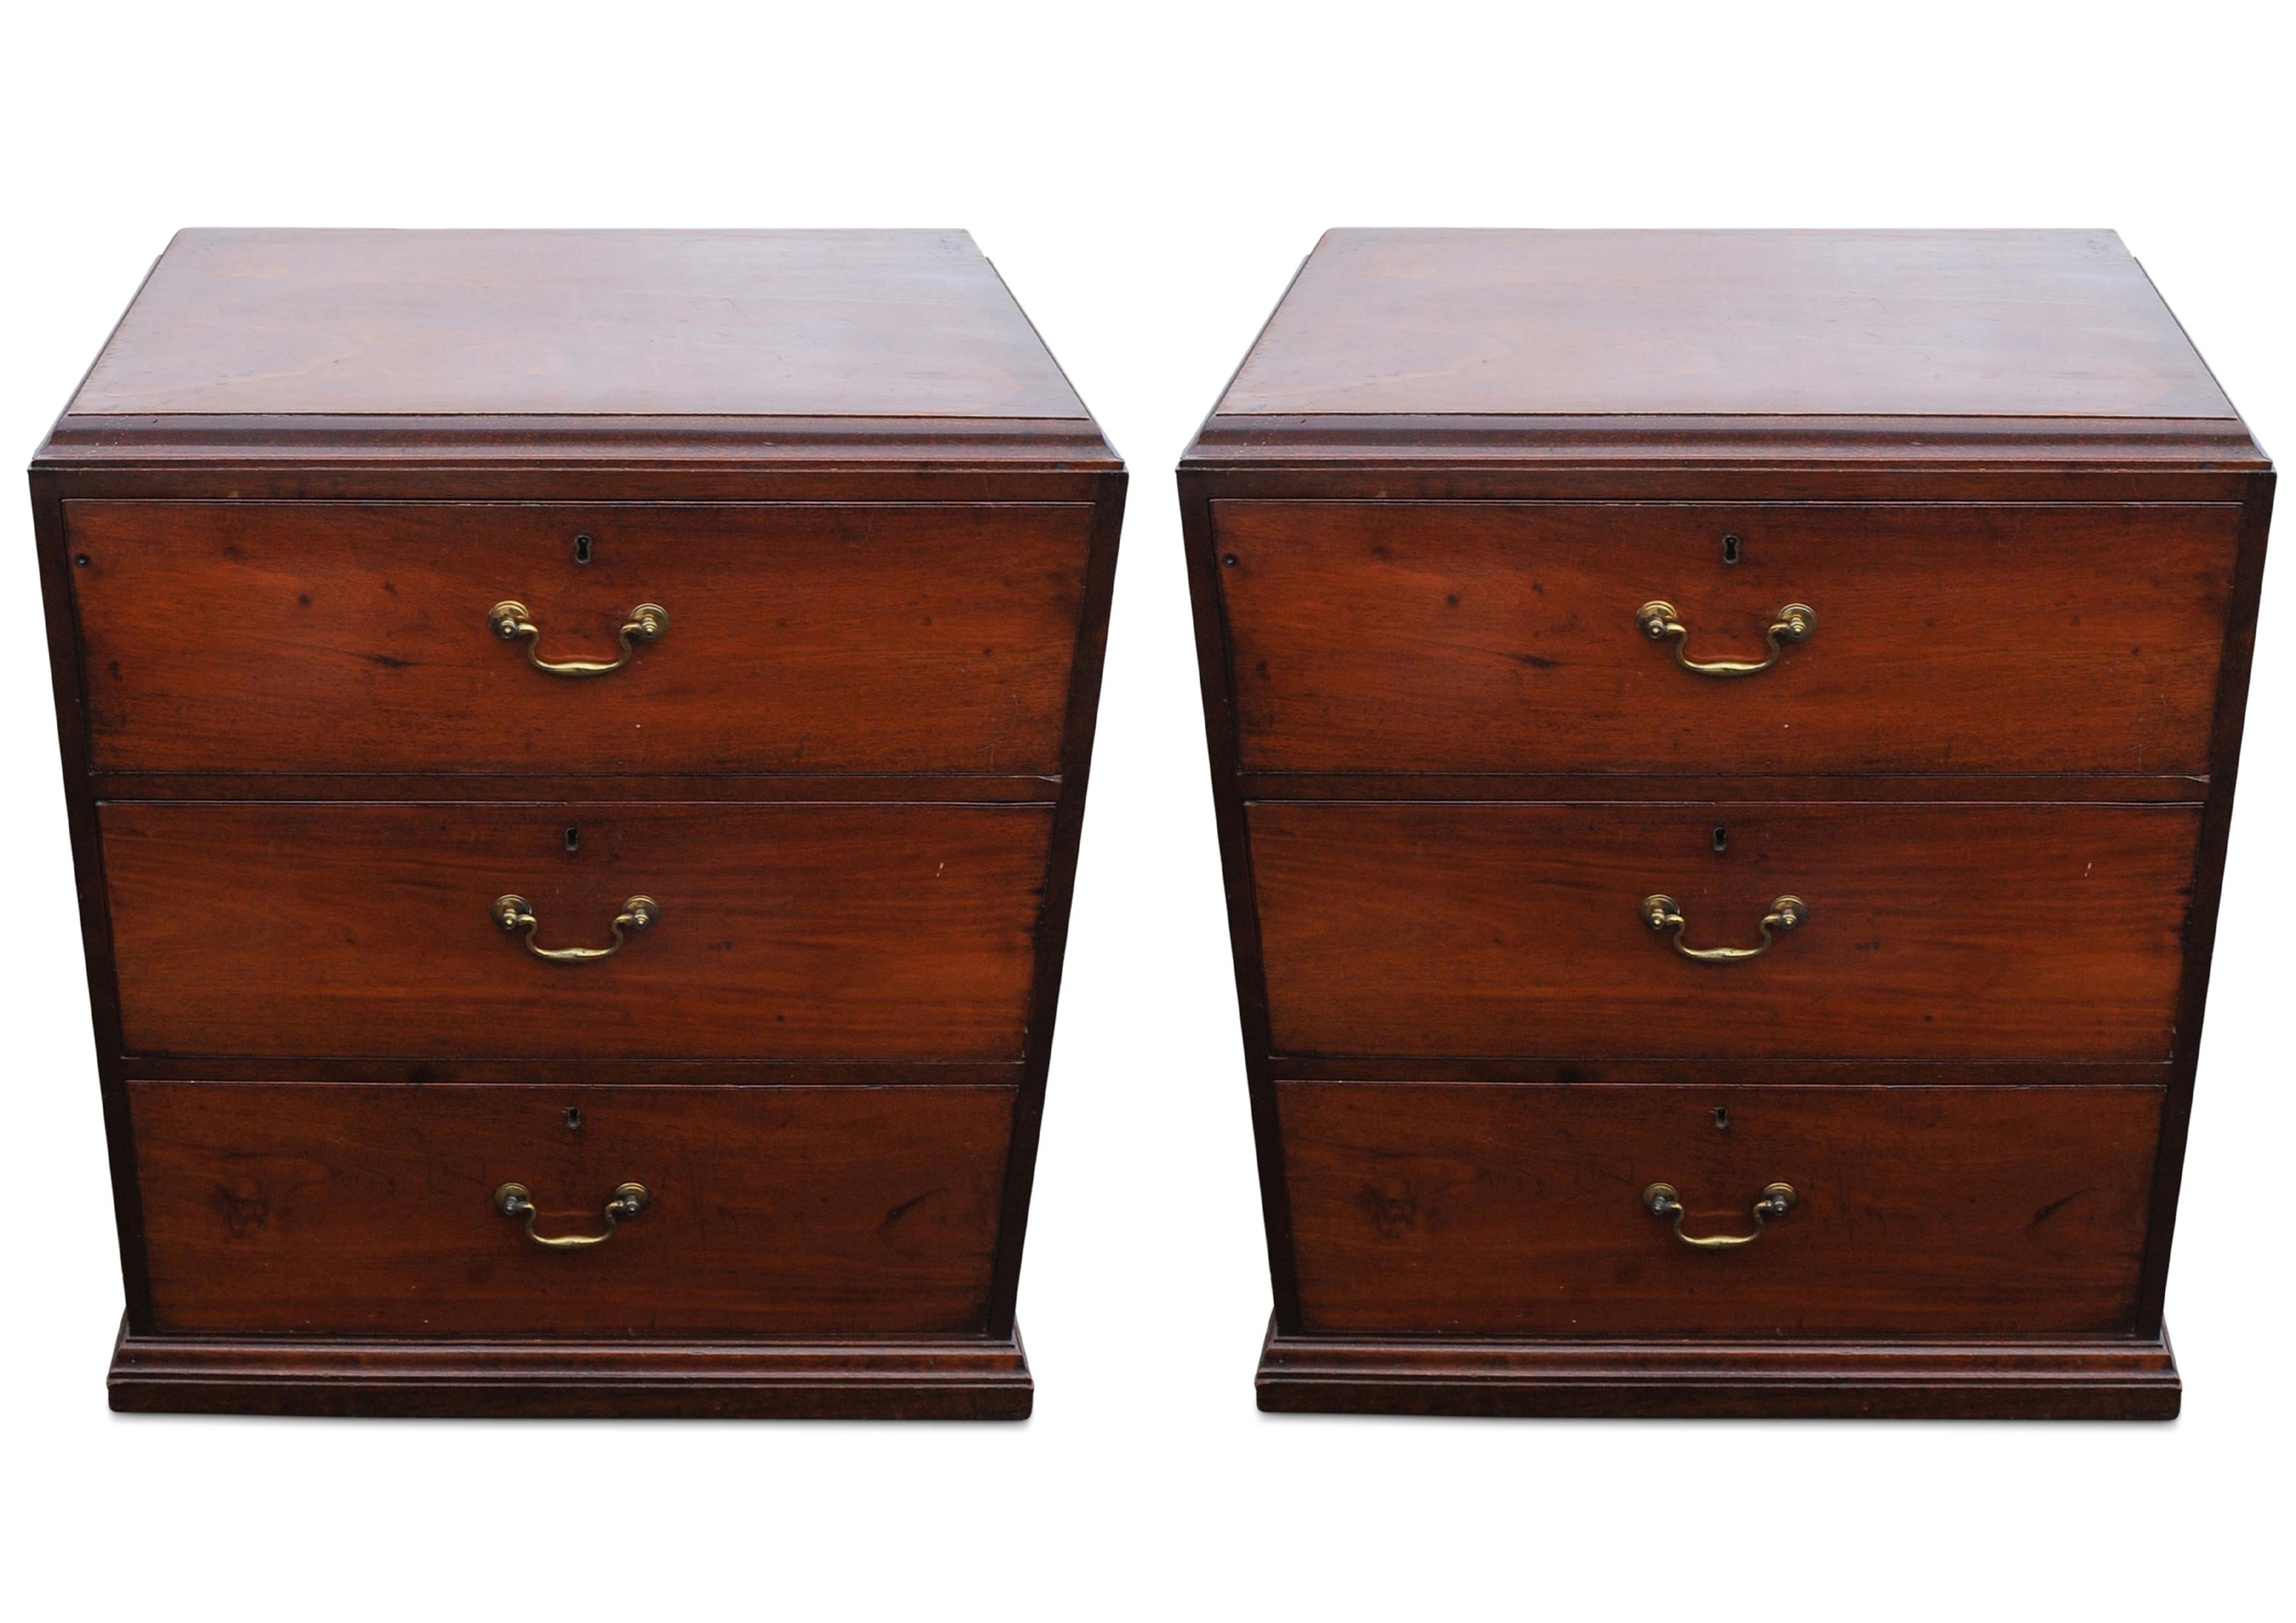 British Pair of Georgian Three Drawer Bedside Chests with Brass Handles